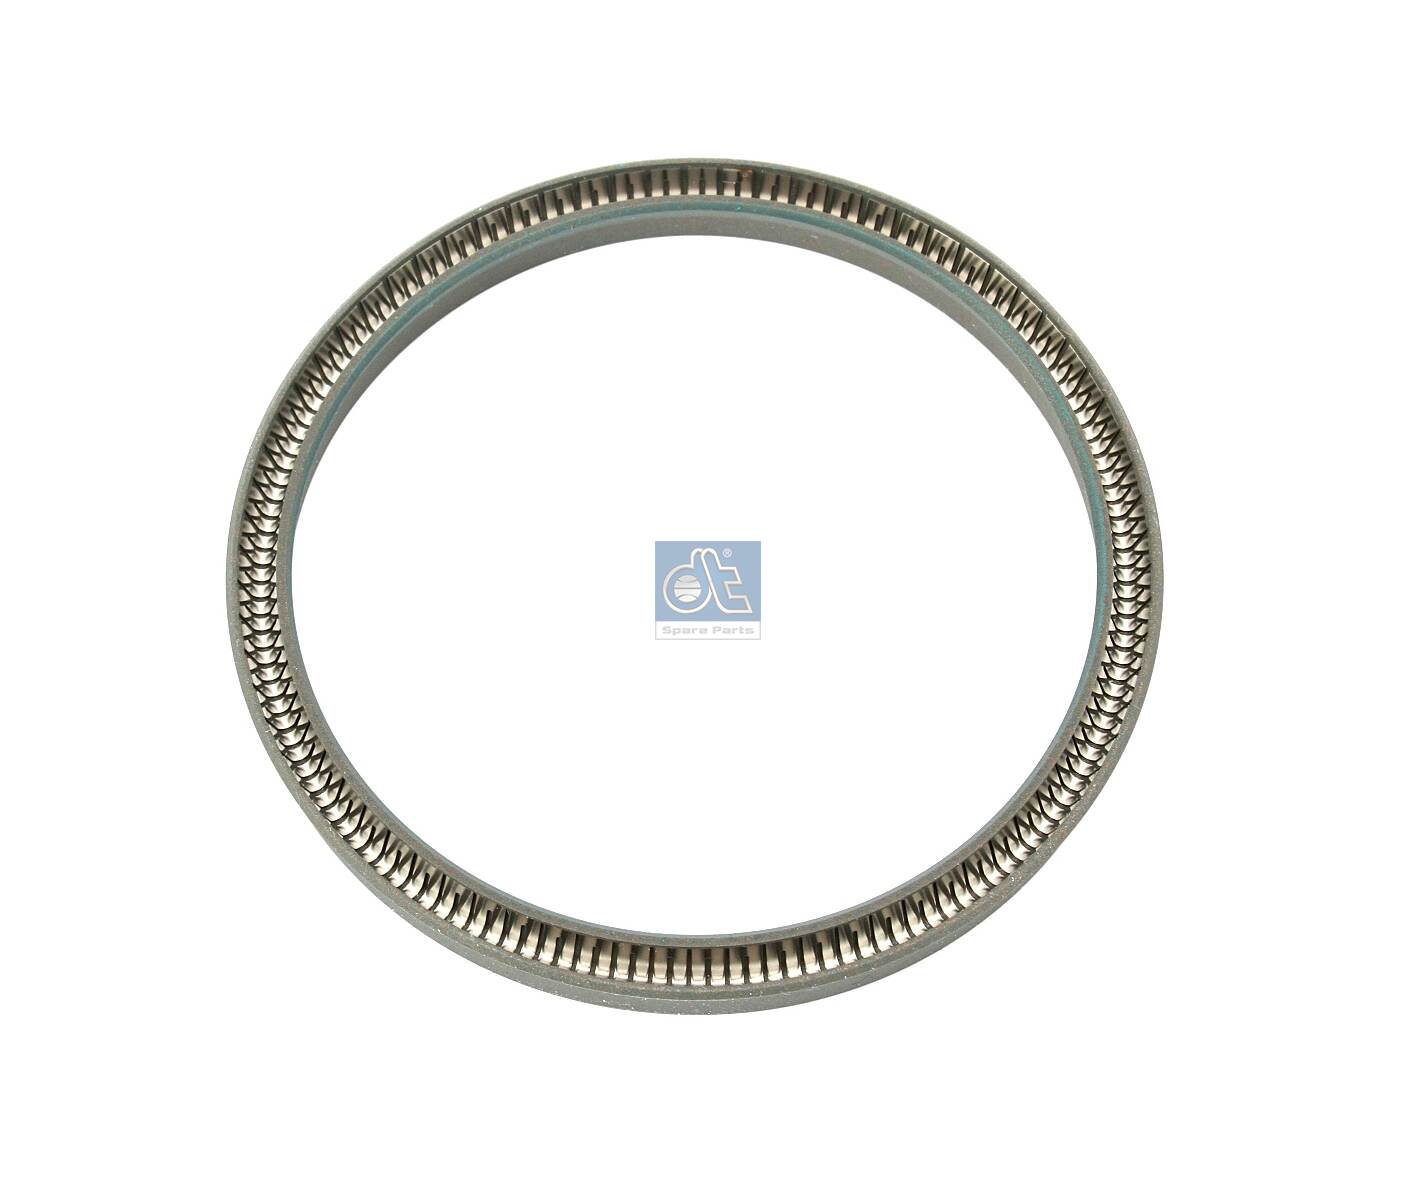 2.10207, Seal Ring, exhaust manifold, DT Spare Parts, 1638052, 7401638052, 025291, 03.39.012, 117723, 267.570, 28093.06, 70-36253-00, 1255597, ESR-052